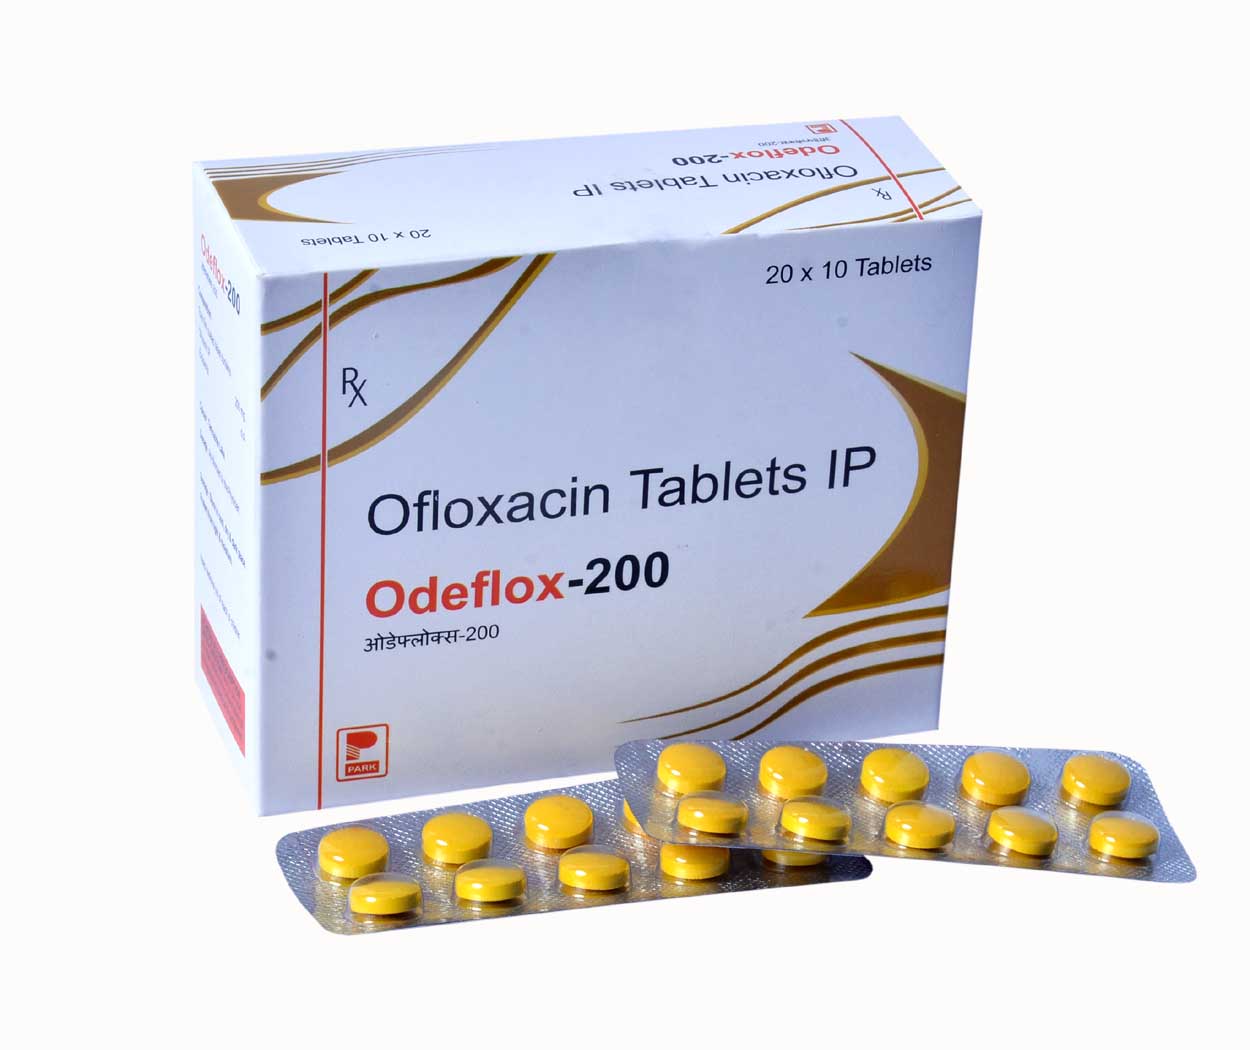 Product Name: Odeflox 200, Compositions of Odeflox 200 are Ofloxacin Tablets IP - Park Pharmaceuticals